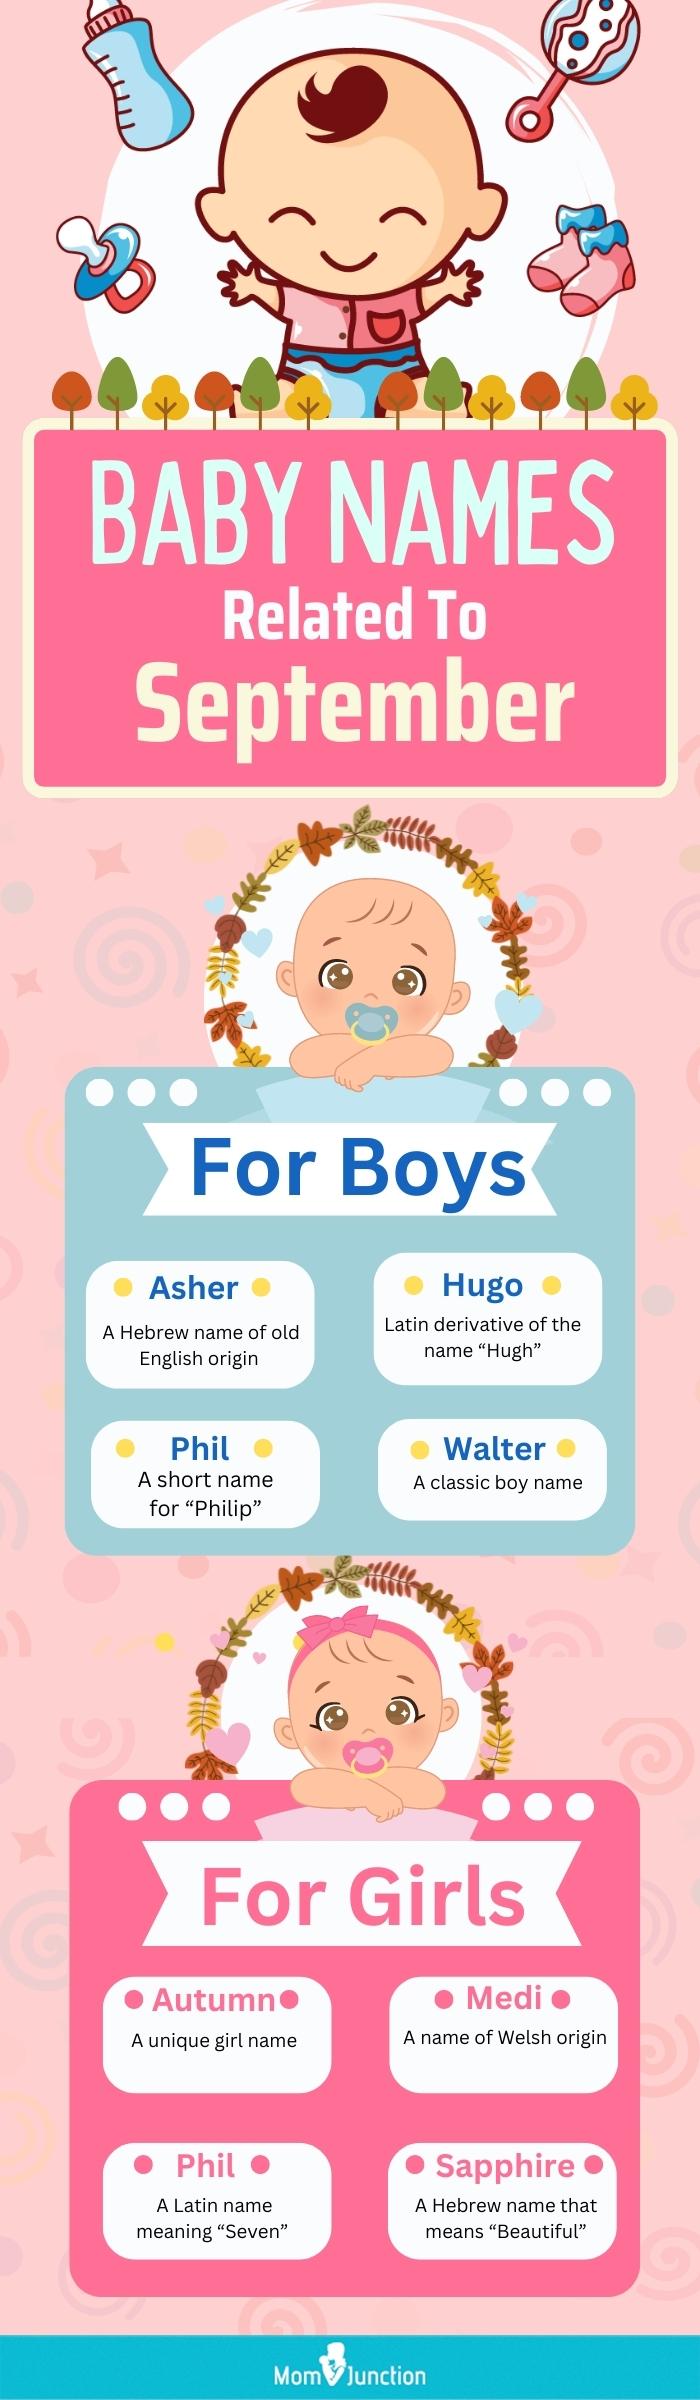 baby names related to september (infographic)